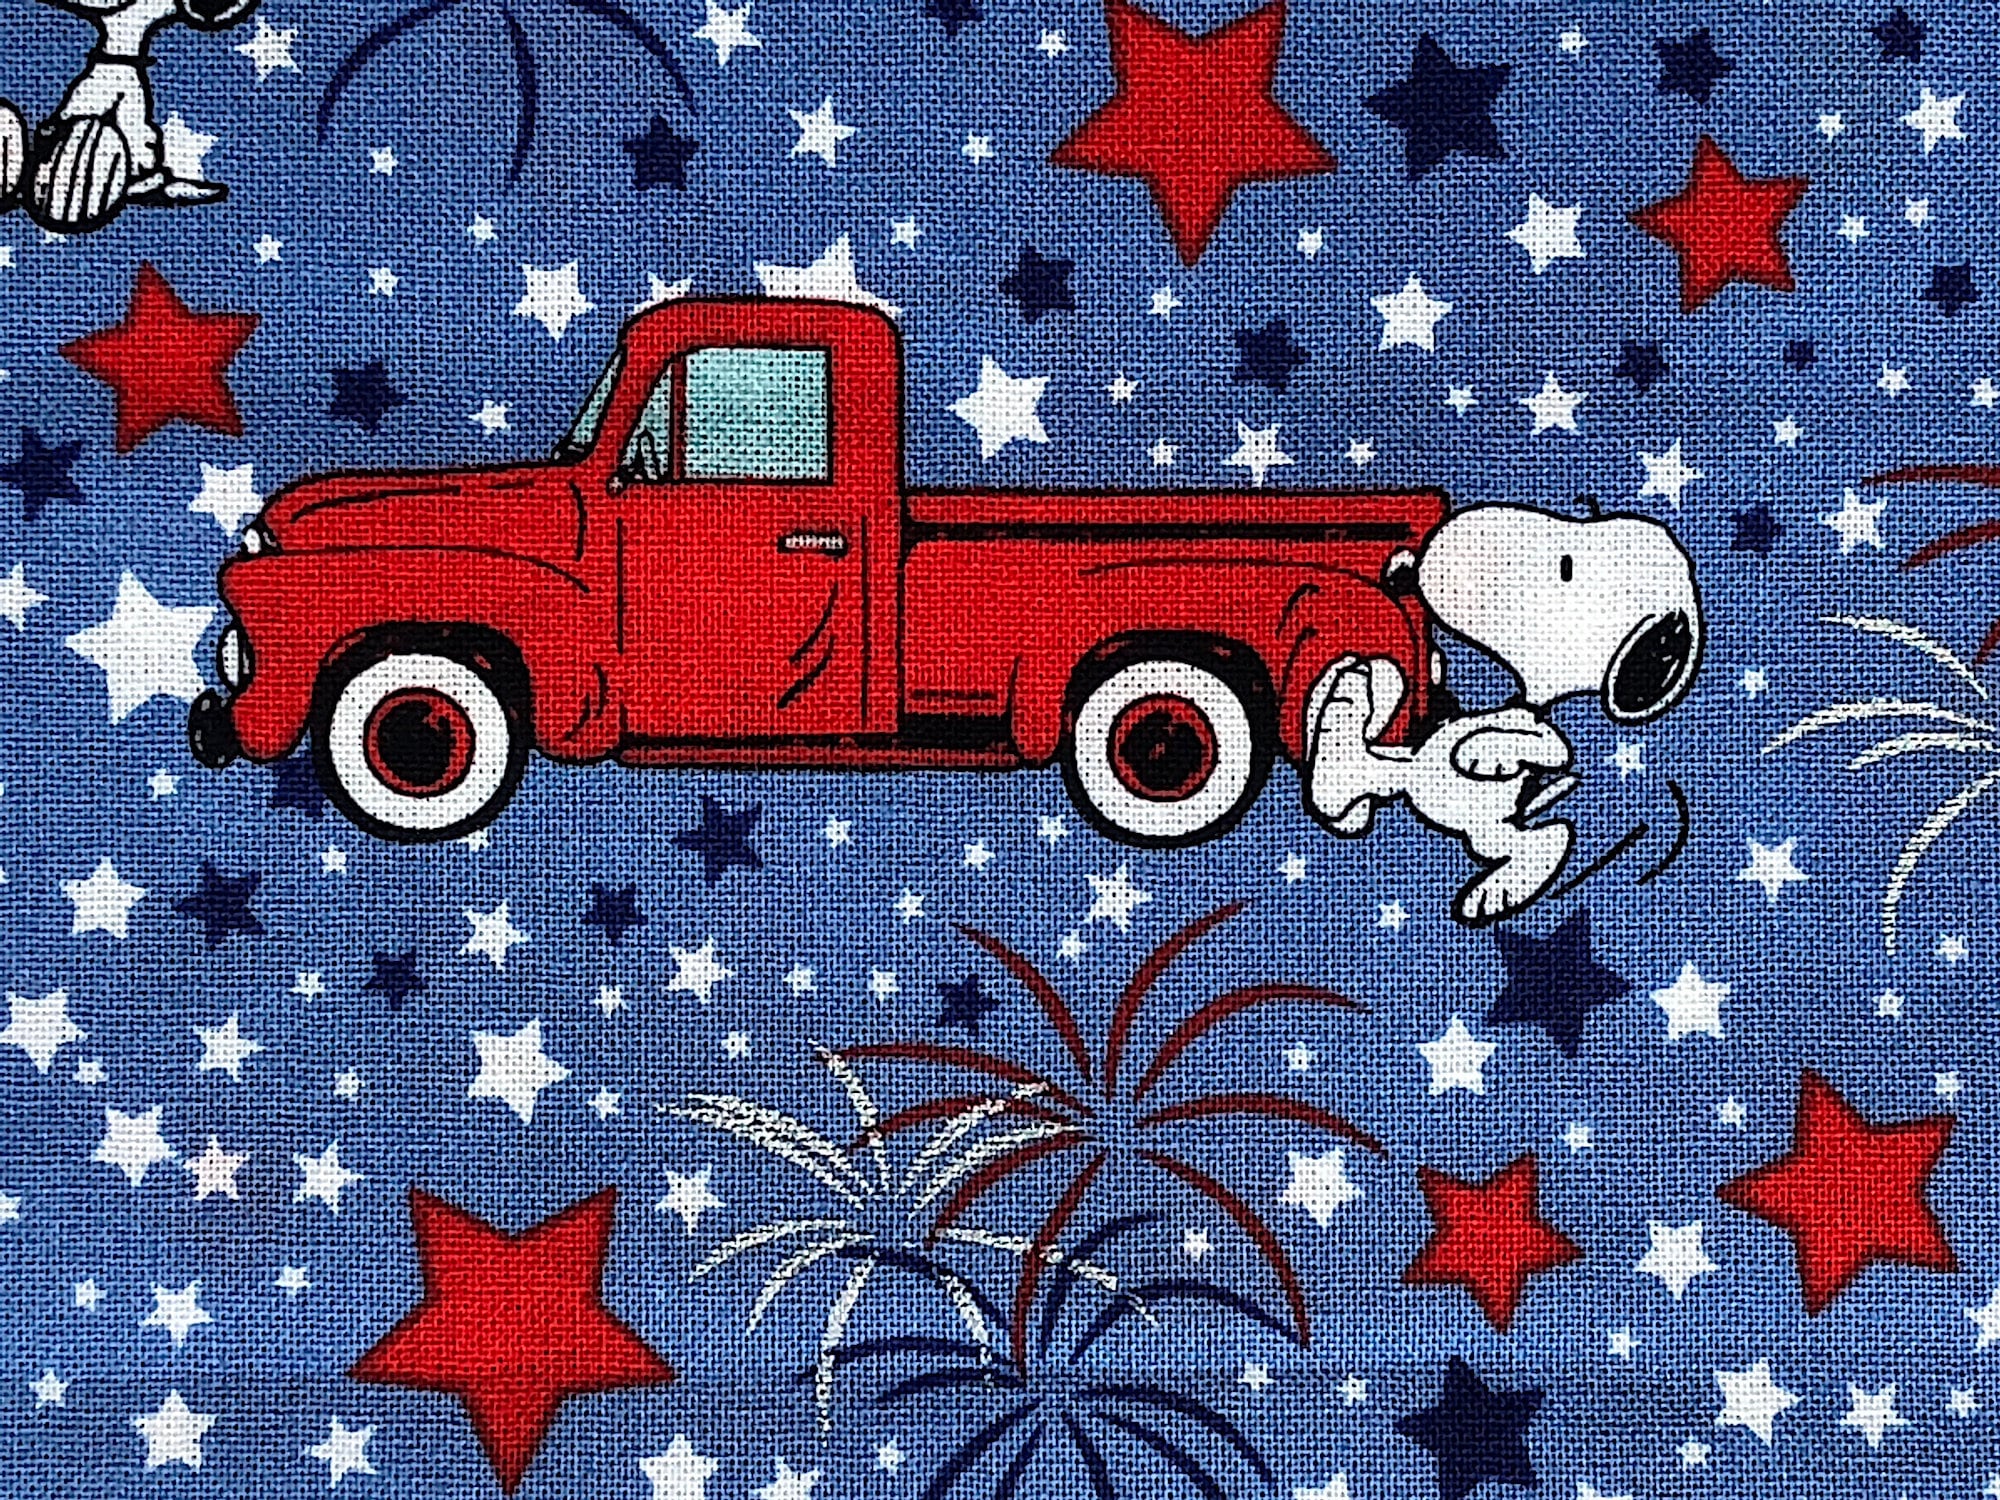 Close up of a red truck, snoopy , stars and fireworks.